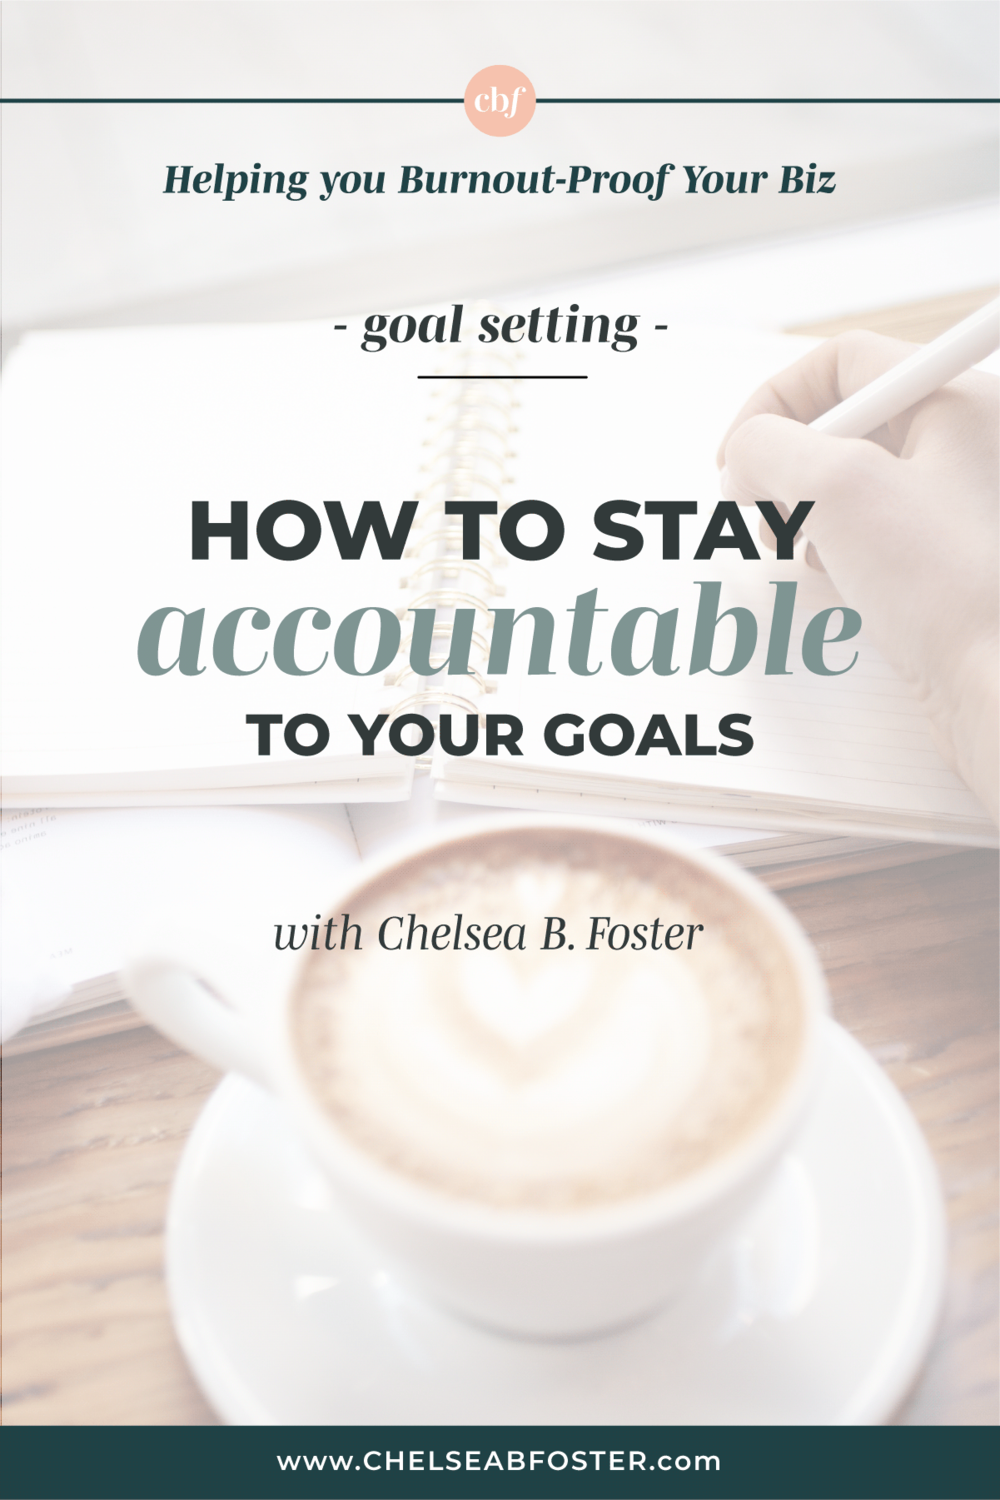 Burnout-Proof Your Biz with Chelsea B Foster | 10+ Ways to Stay Accountable to Your Goals (even when you feel like giving up)